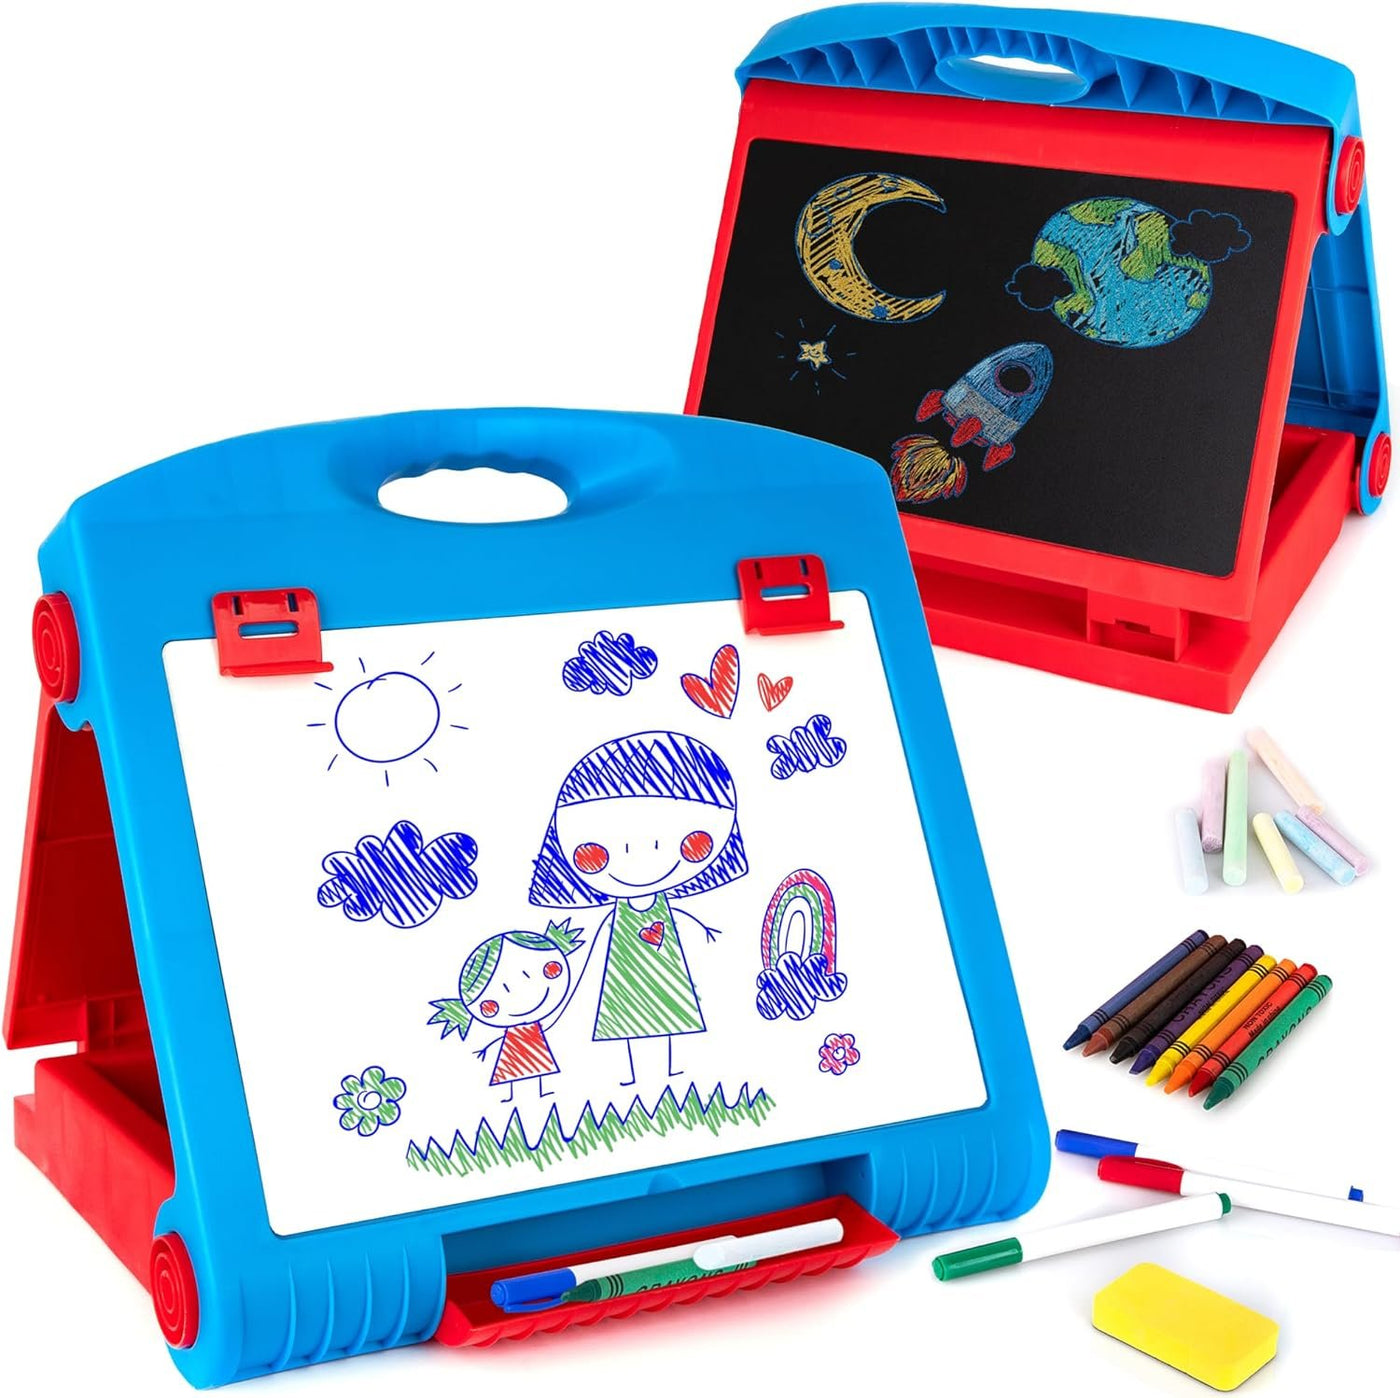 Easel Board for Kids, Tabletop Art Easel for Toddlers with Dry Erase Board, Whiteboard, and Chalk Board Easel, Kids Easel Set Includes Chalk, Crayons, and Markers, Kids Art Supplies Ages 6-8